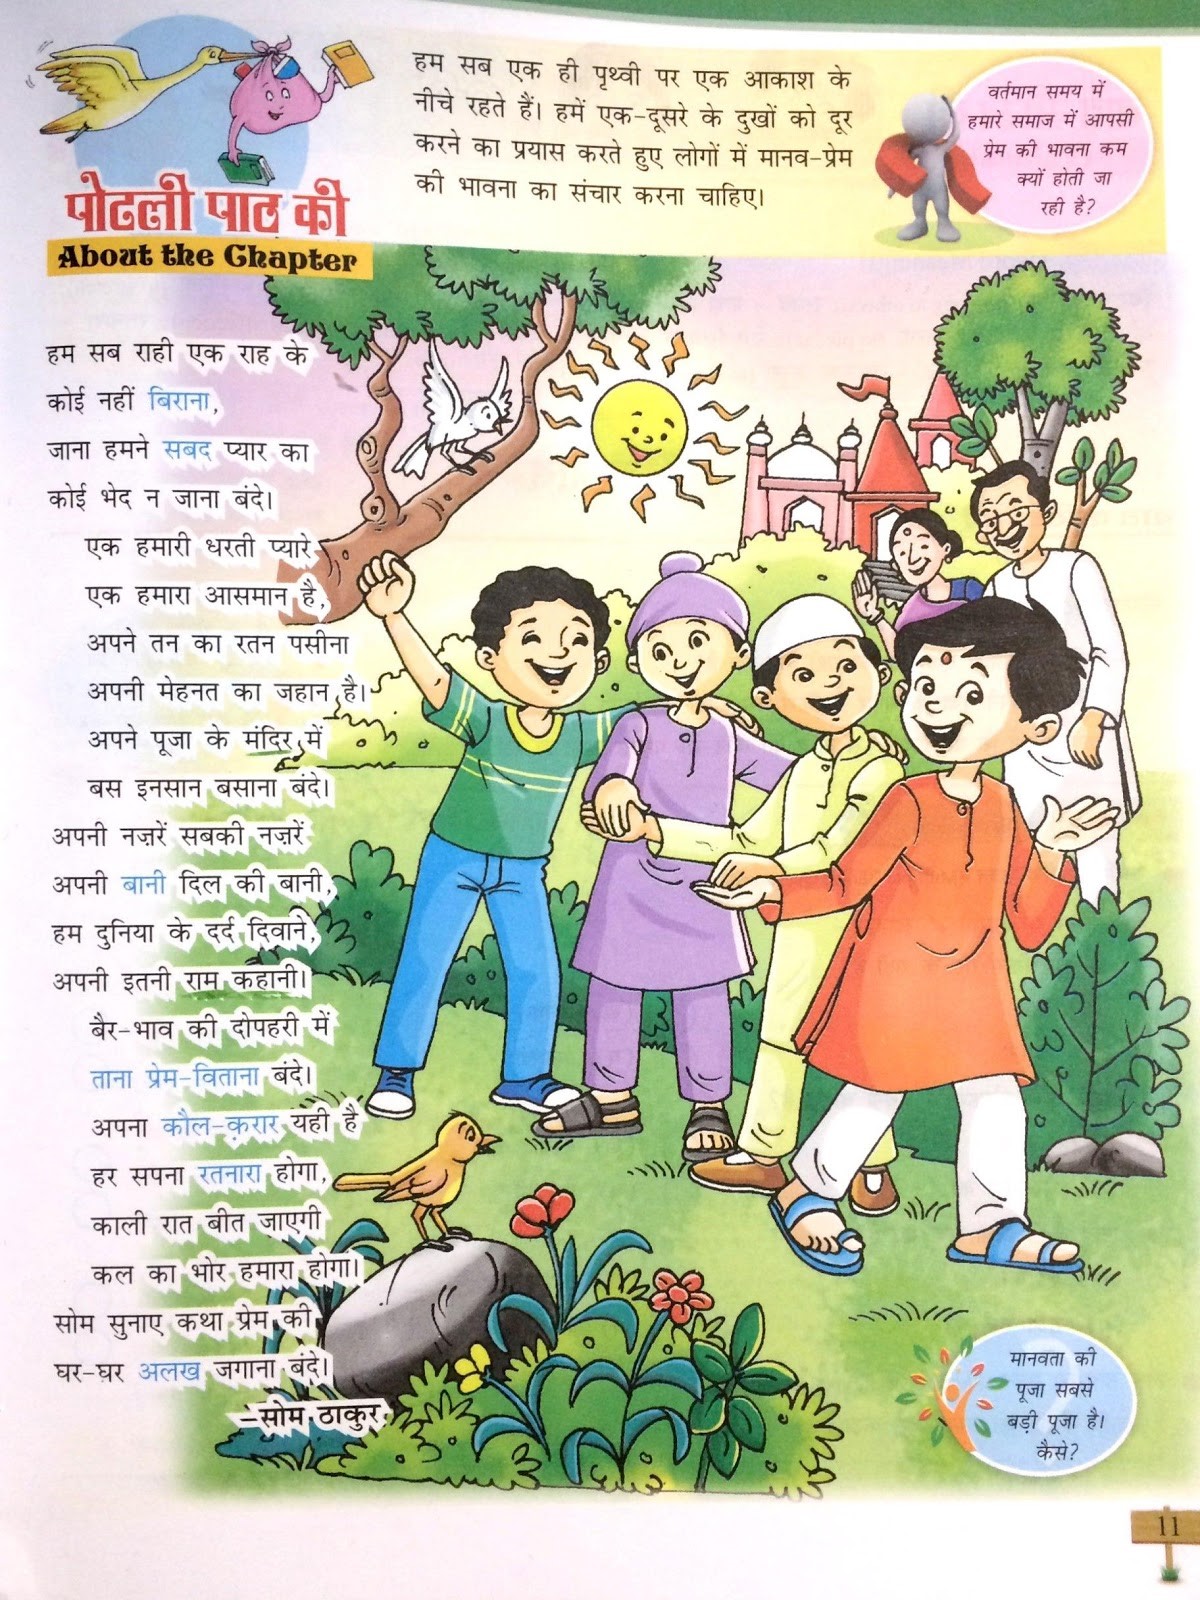 Secular Ideal in CISCE textbook